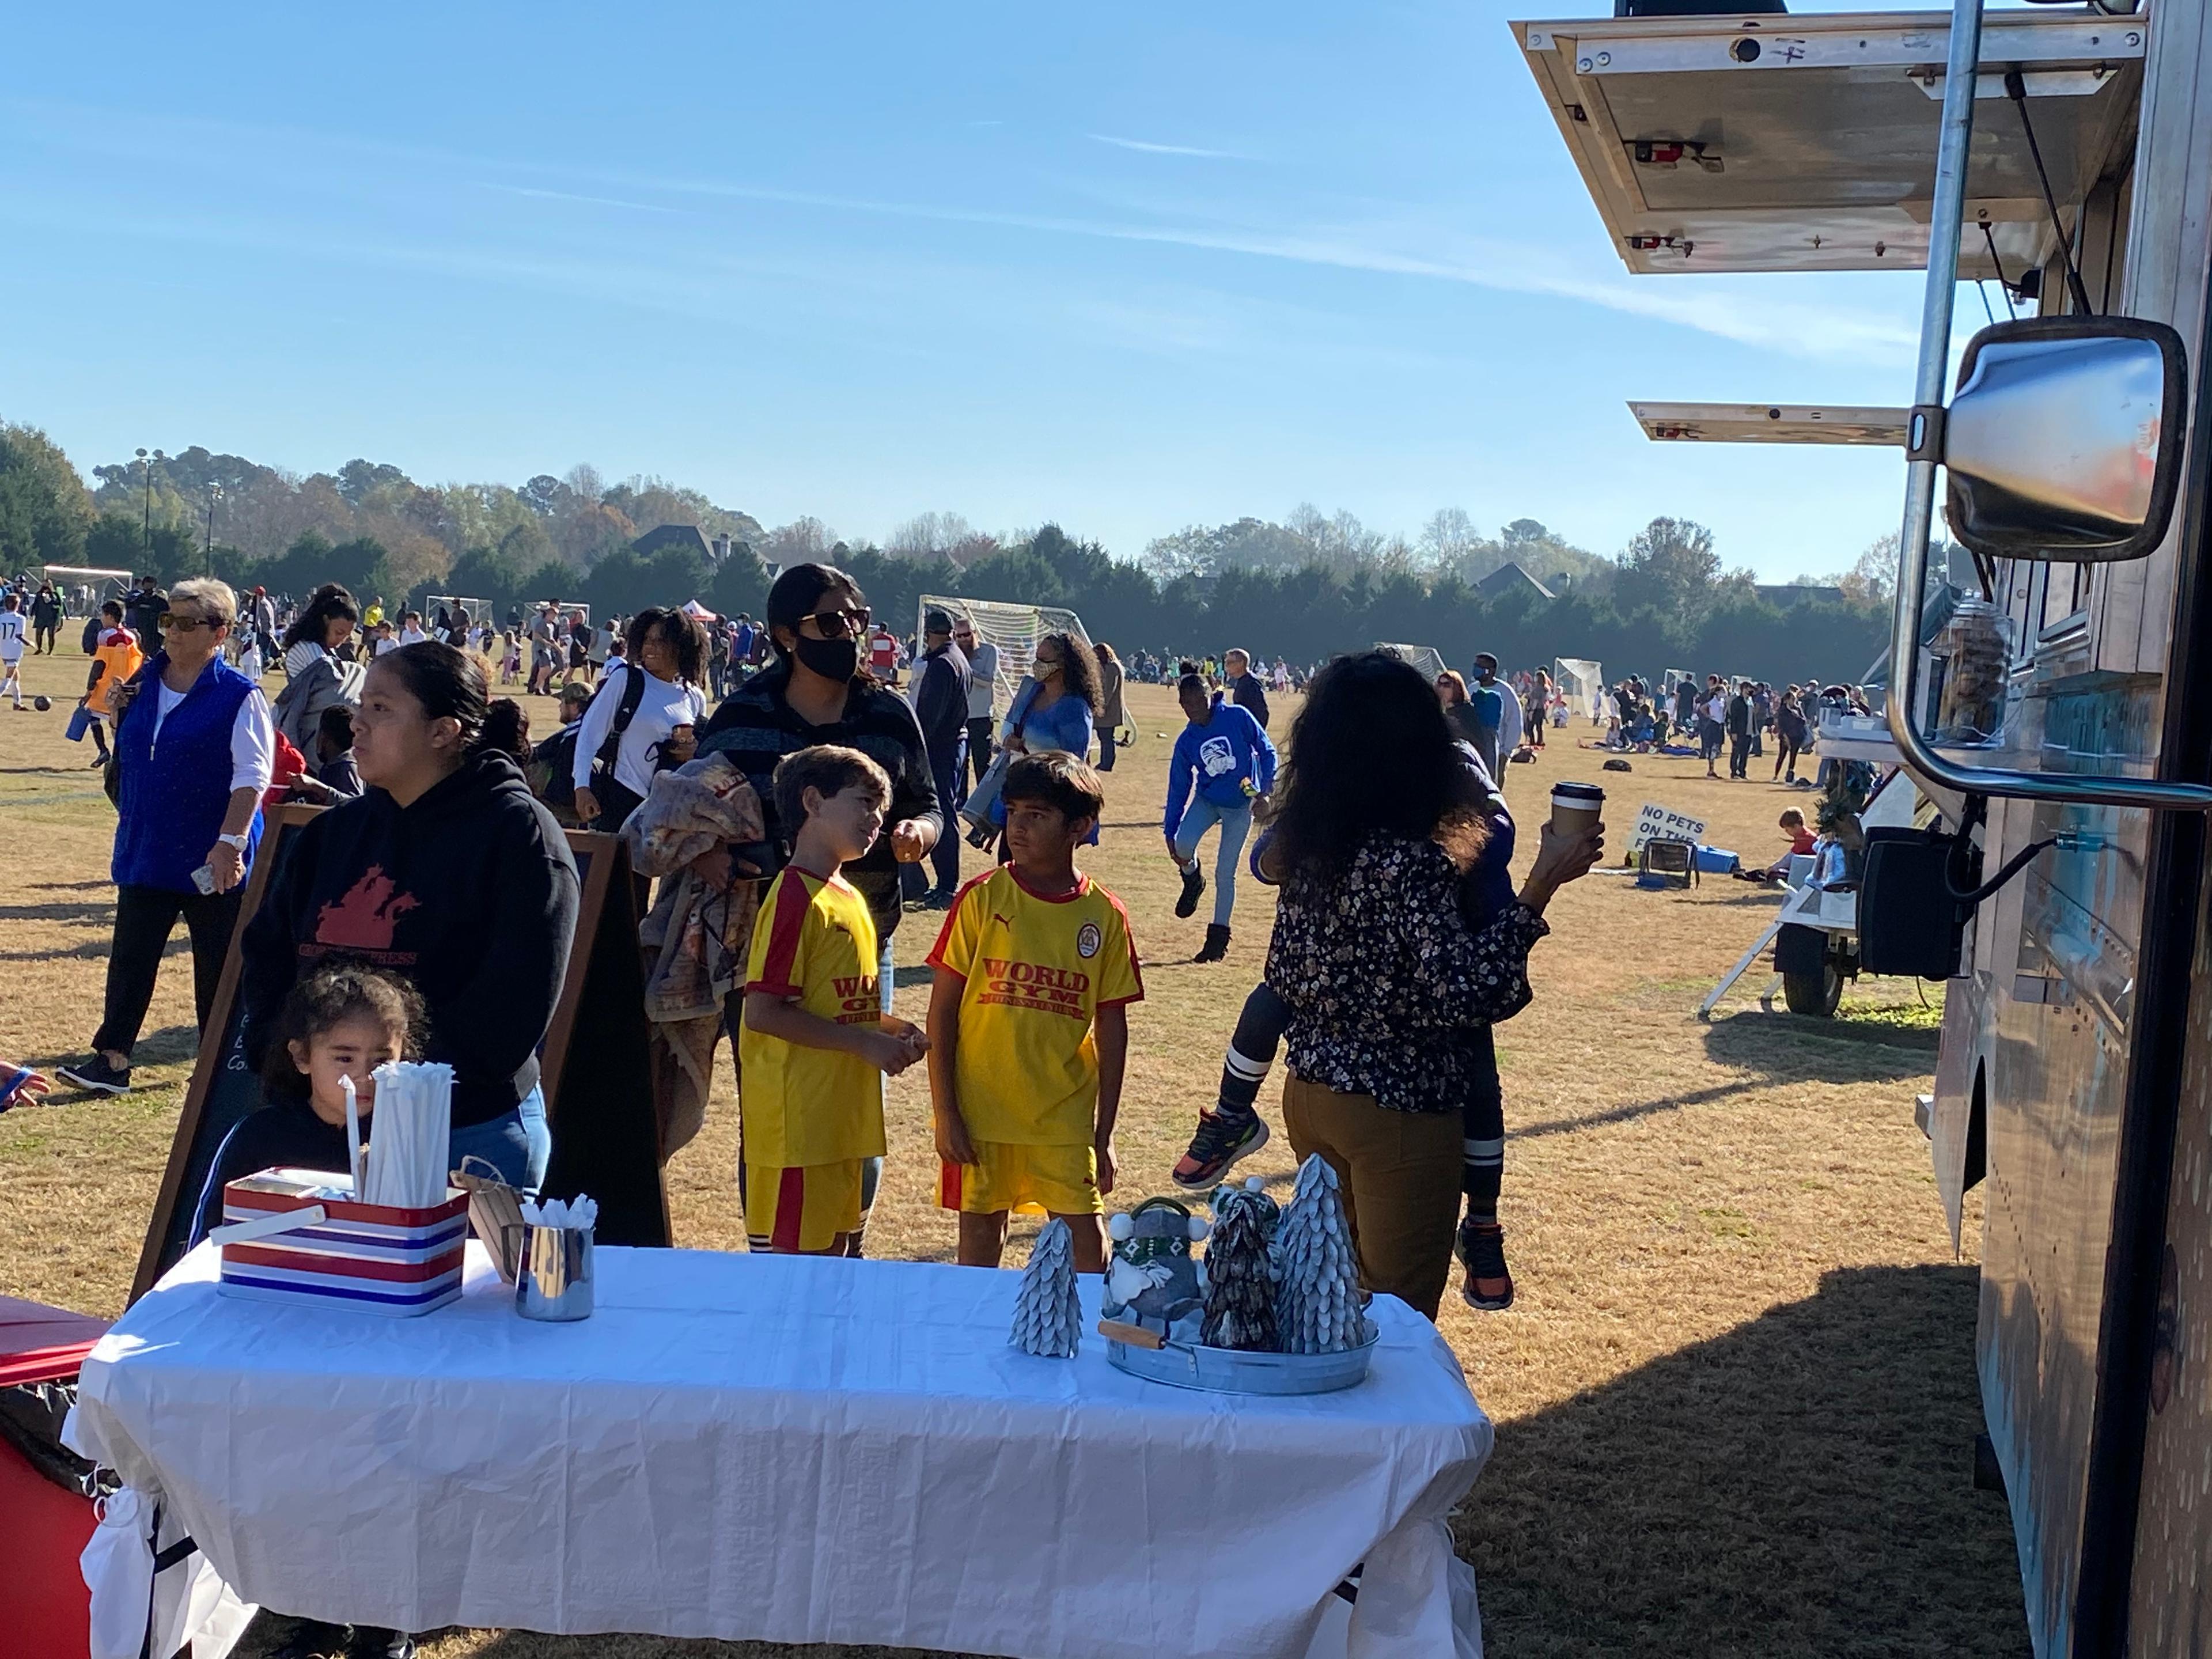 soccer kids ordering hot chocolate at soccer tournament during holiday season 